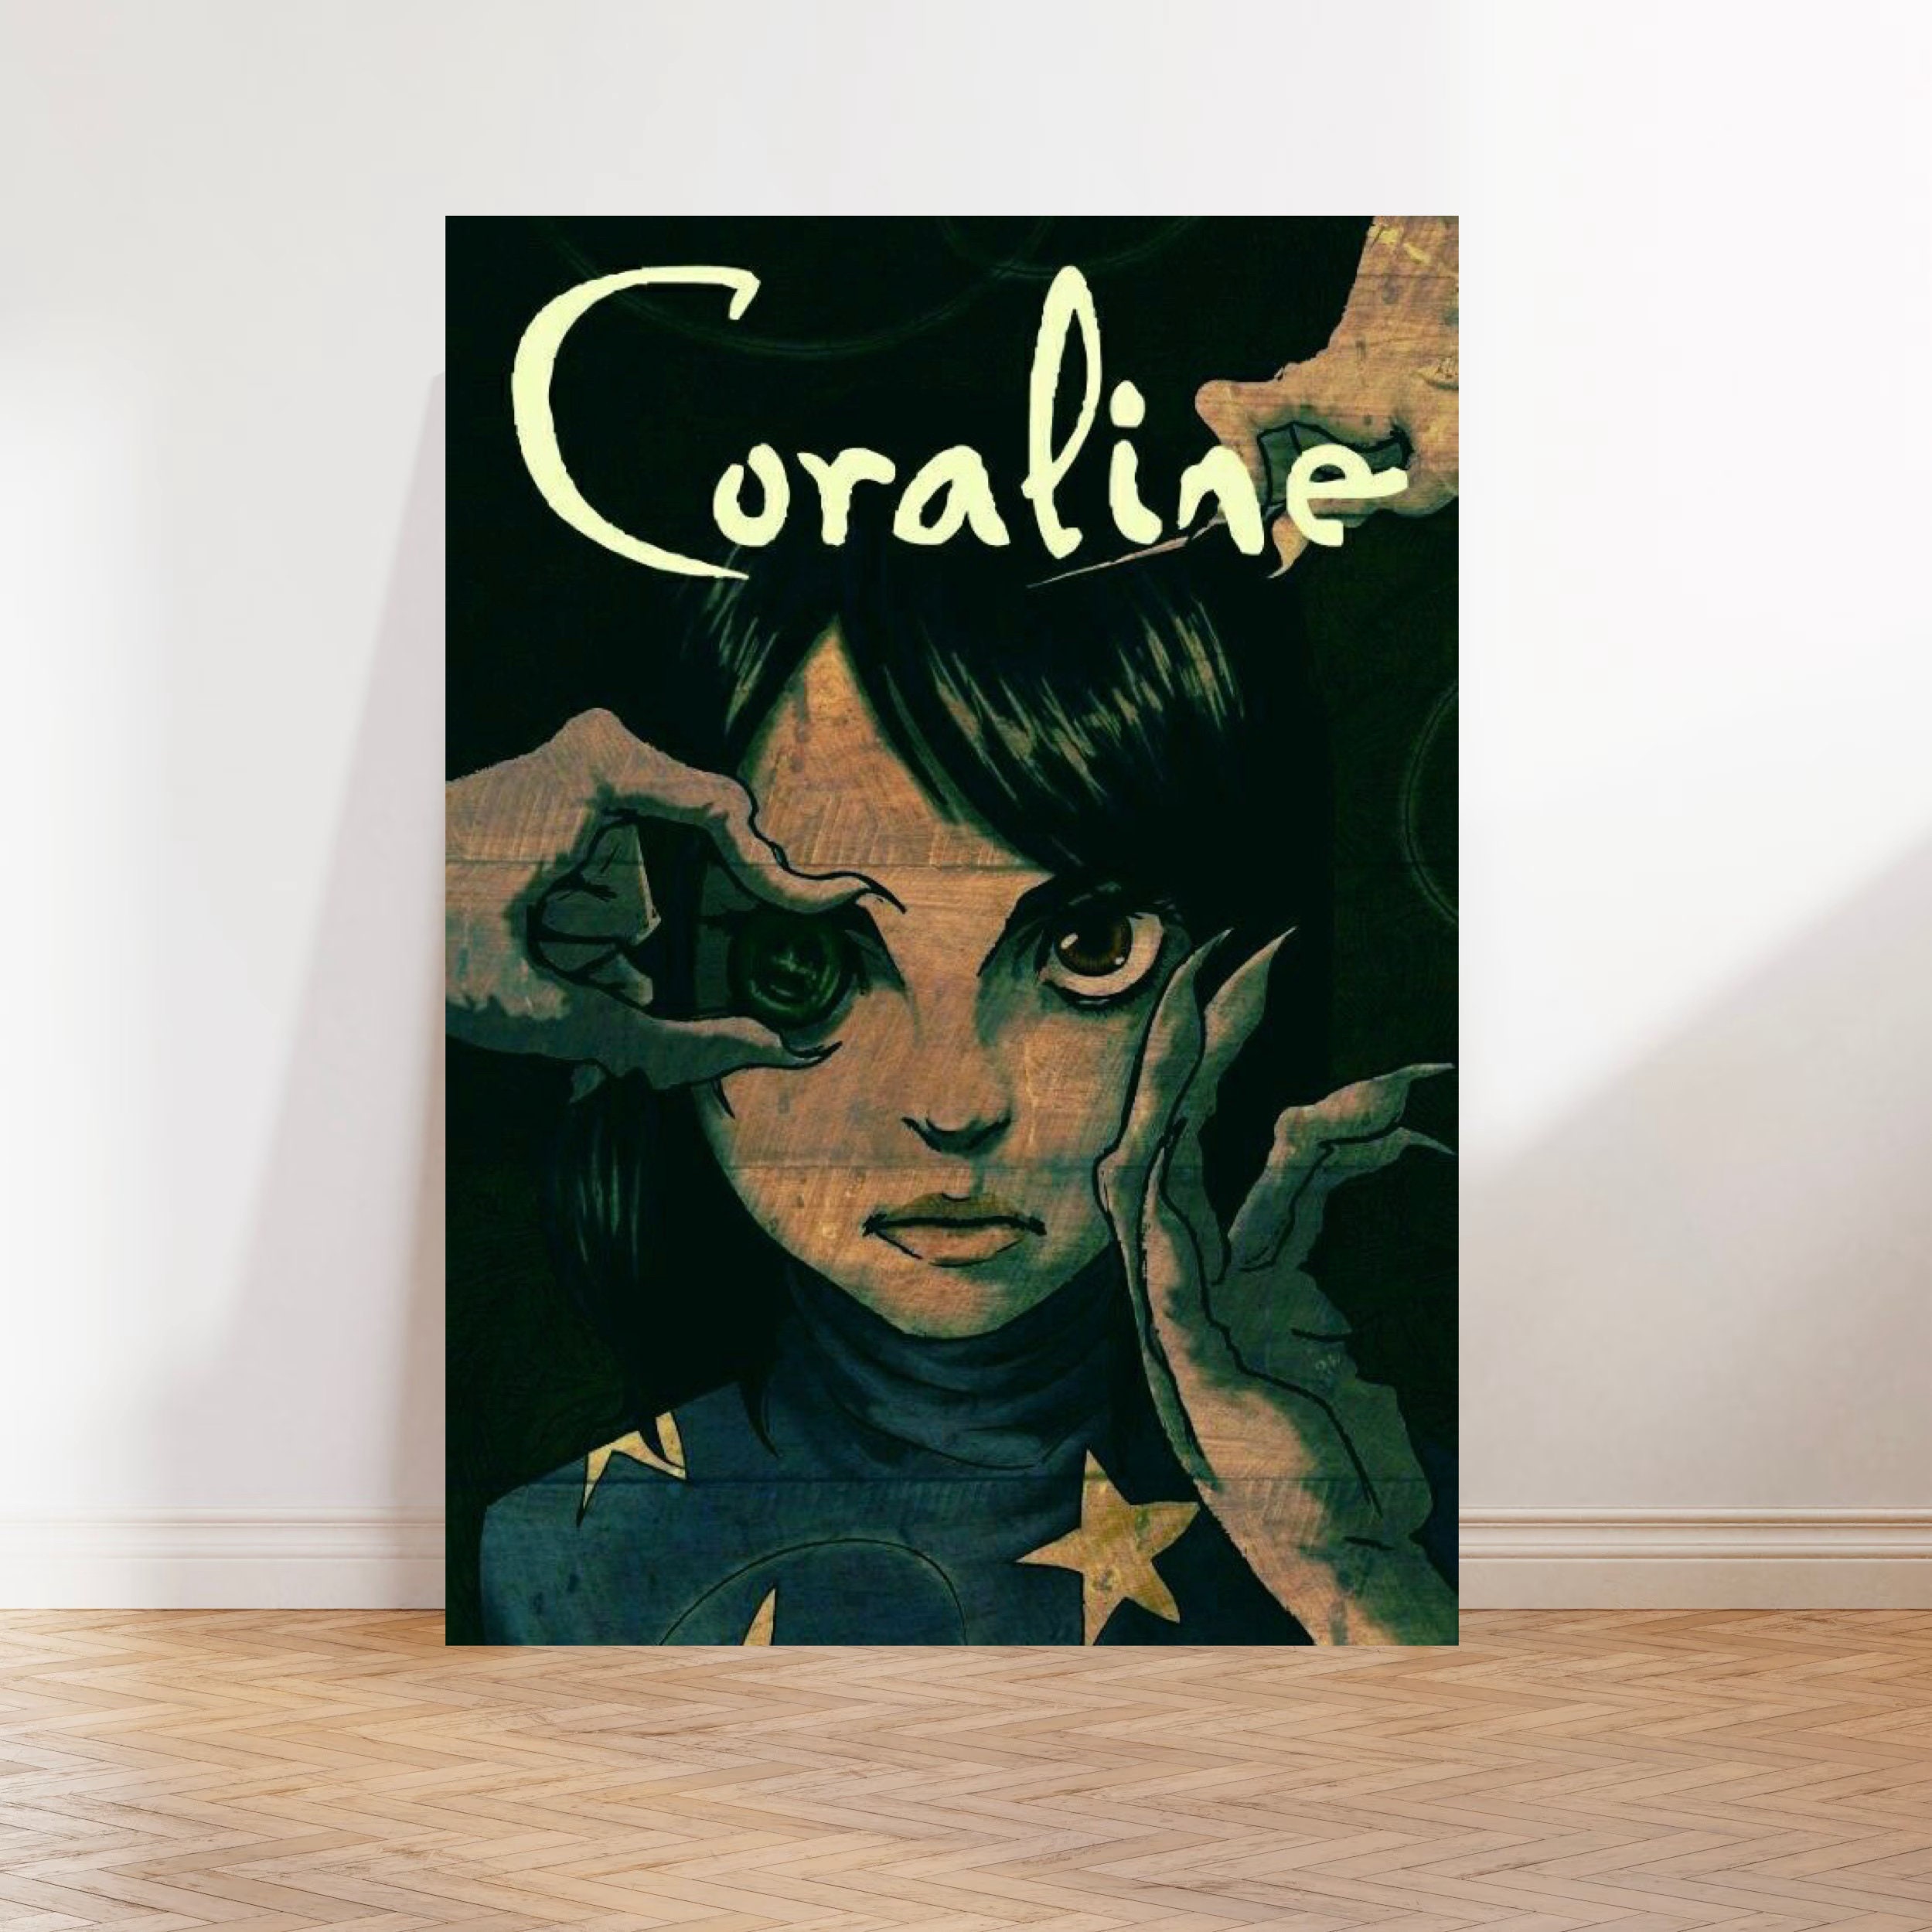 Signed, Coraline by Neil Gaiman, Illustrated by Dave Mckean